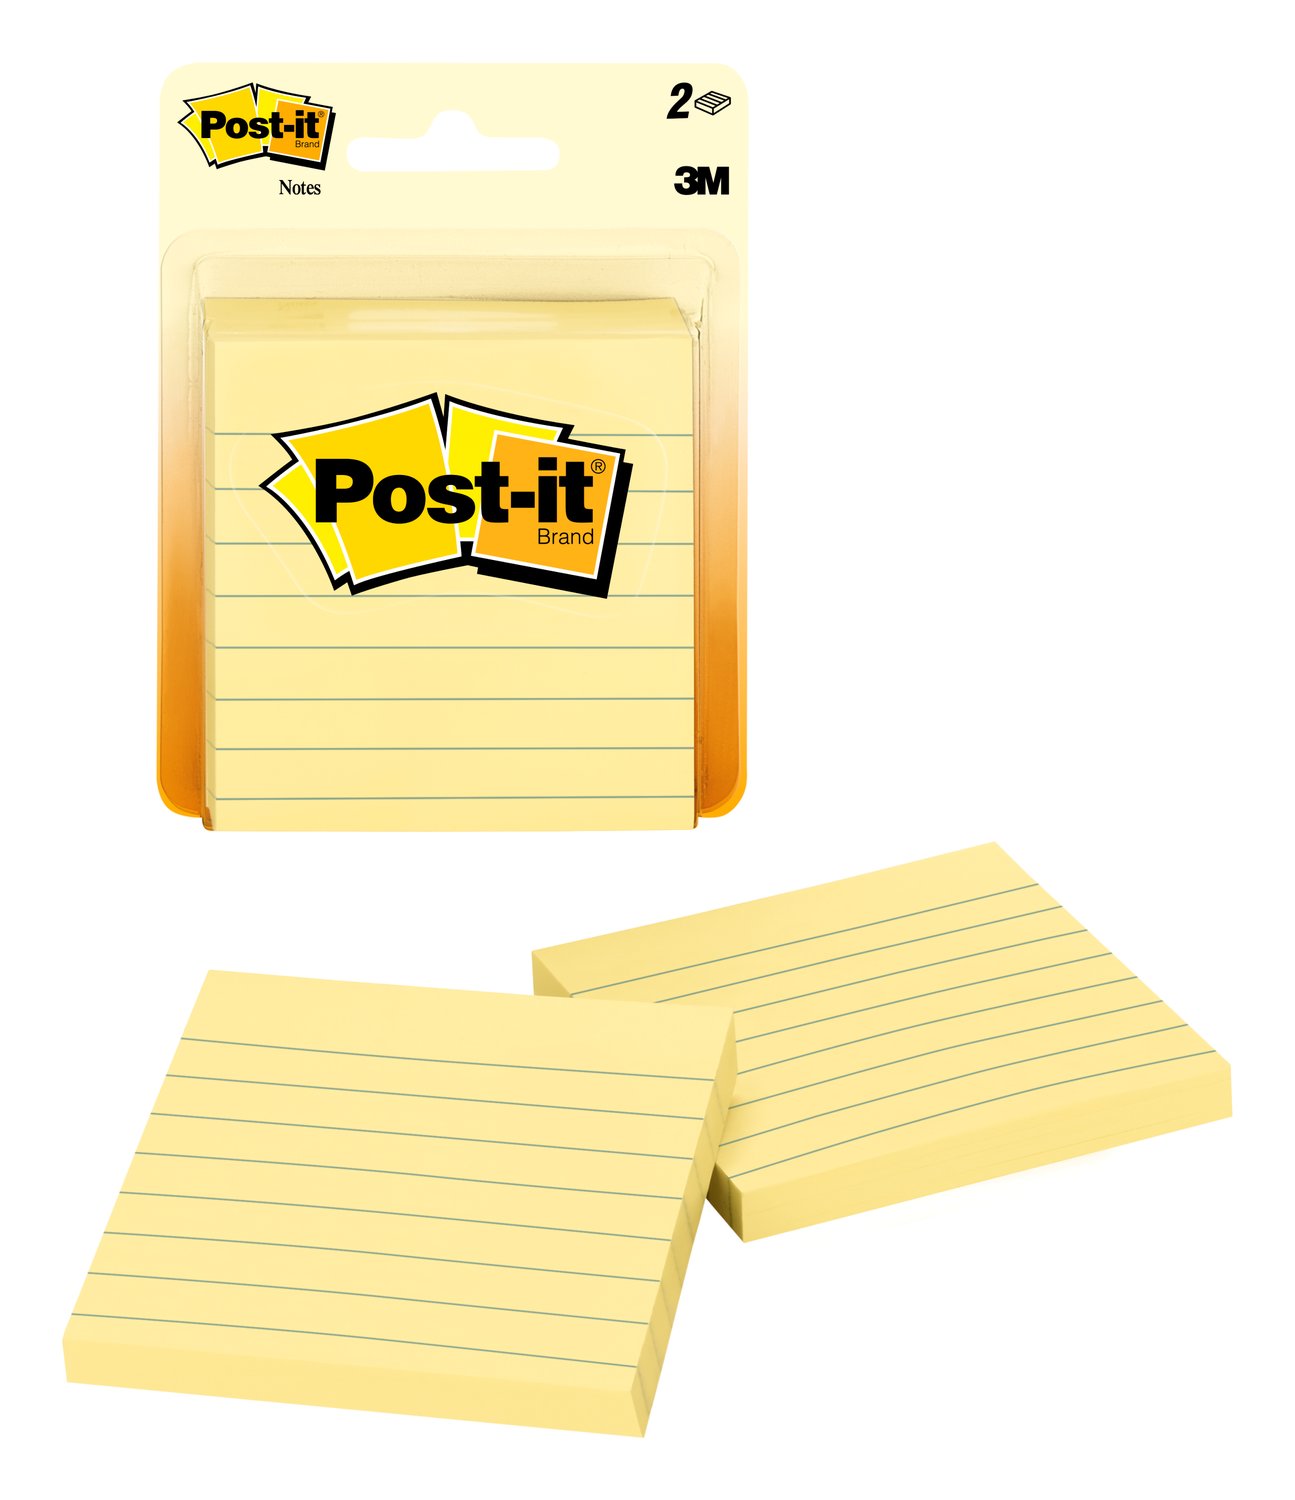 7010379039 - Post-it Notes 630PK2 3 in x 3 in (7.62 cm x 7.62 cm) Canary Yellow,
Lined